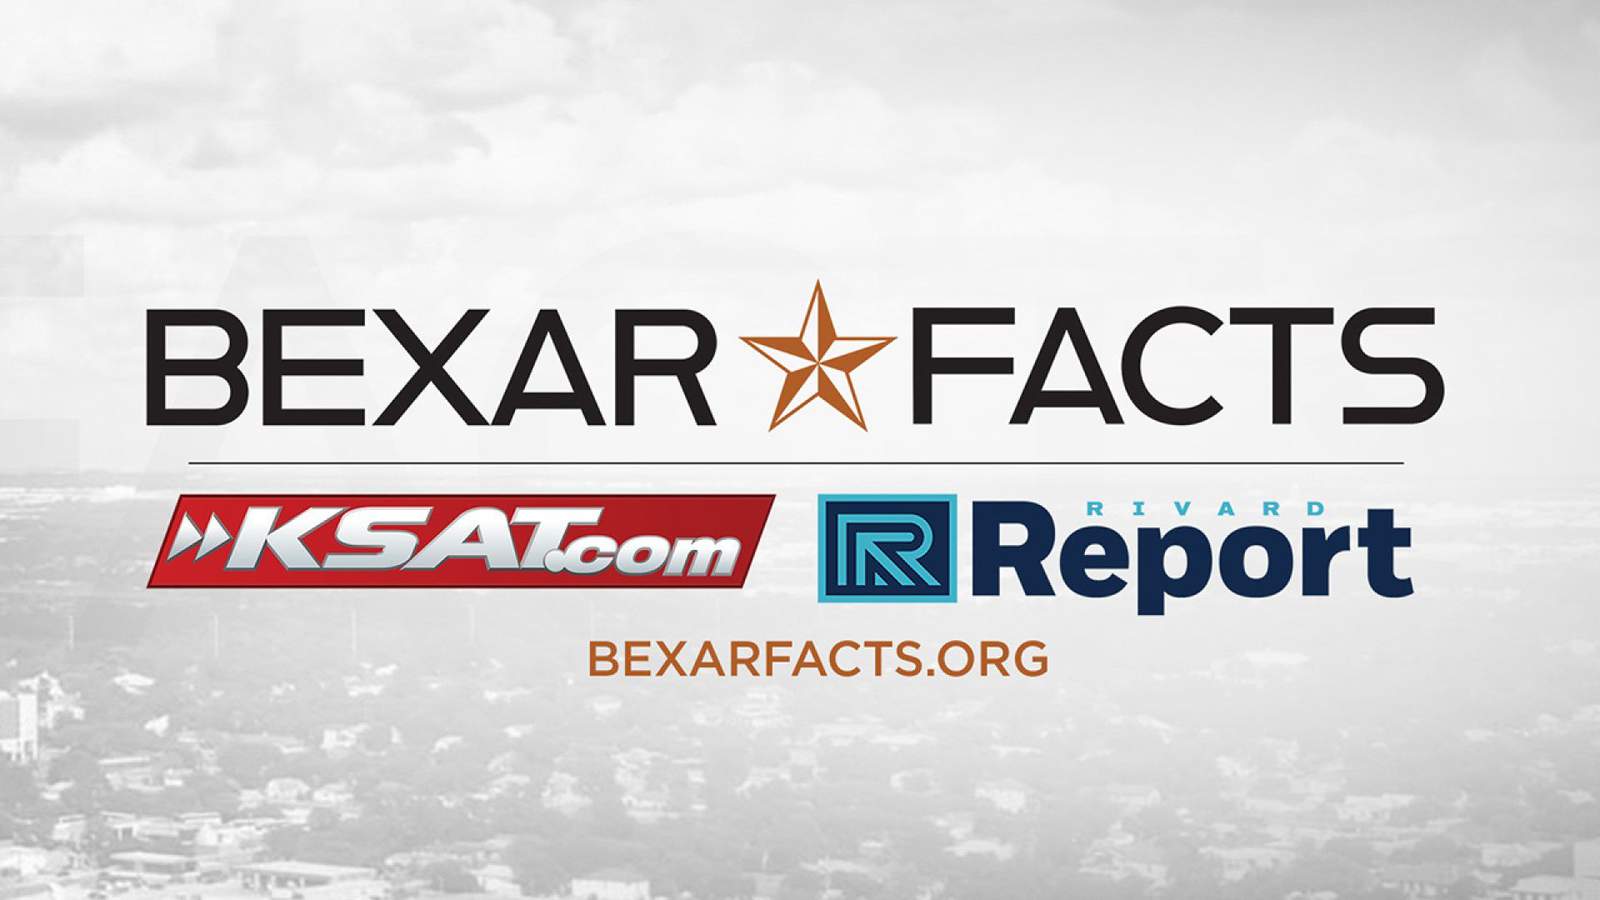 WATCH: Mayor, county judge join KSAT, Bexar Facts for virtual town hall on COVID-19